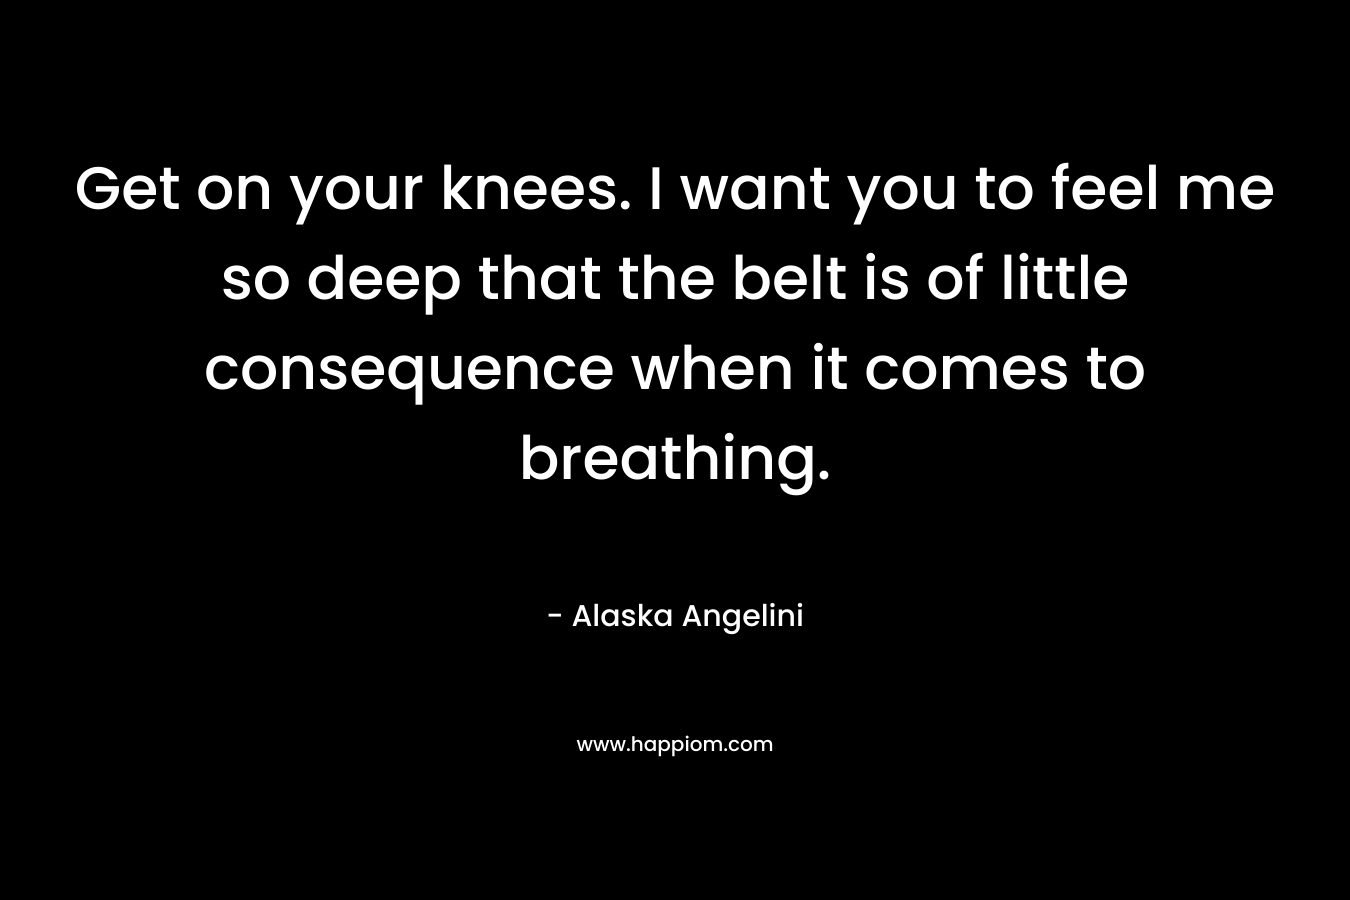 Get on your knees. I want you to feel me so deep that the belt is of little consequence when it comes to breathing. – Alaska Angelini